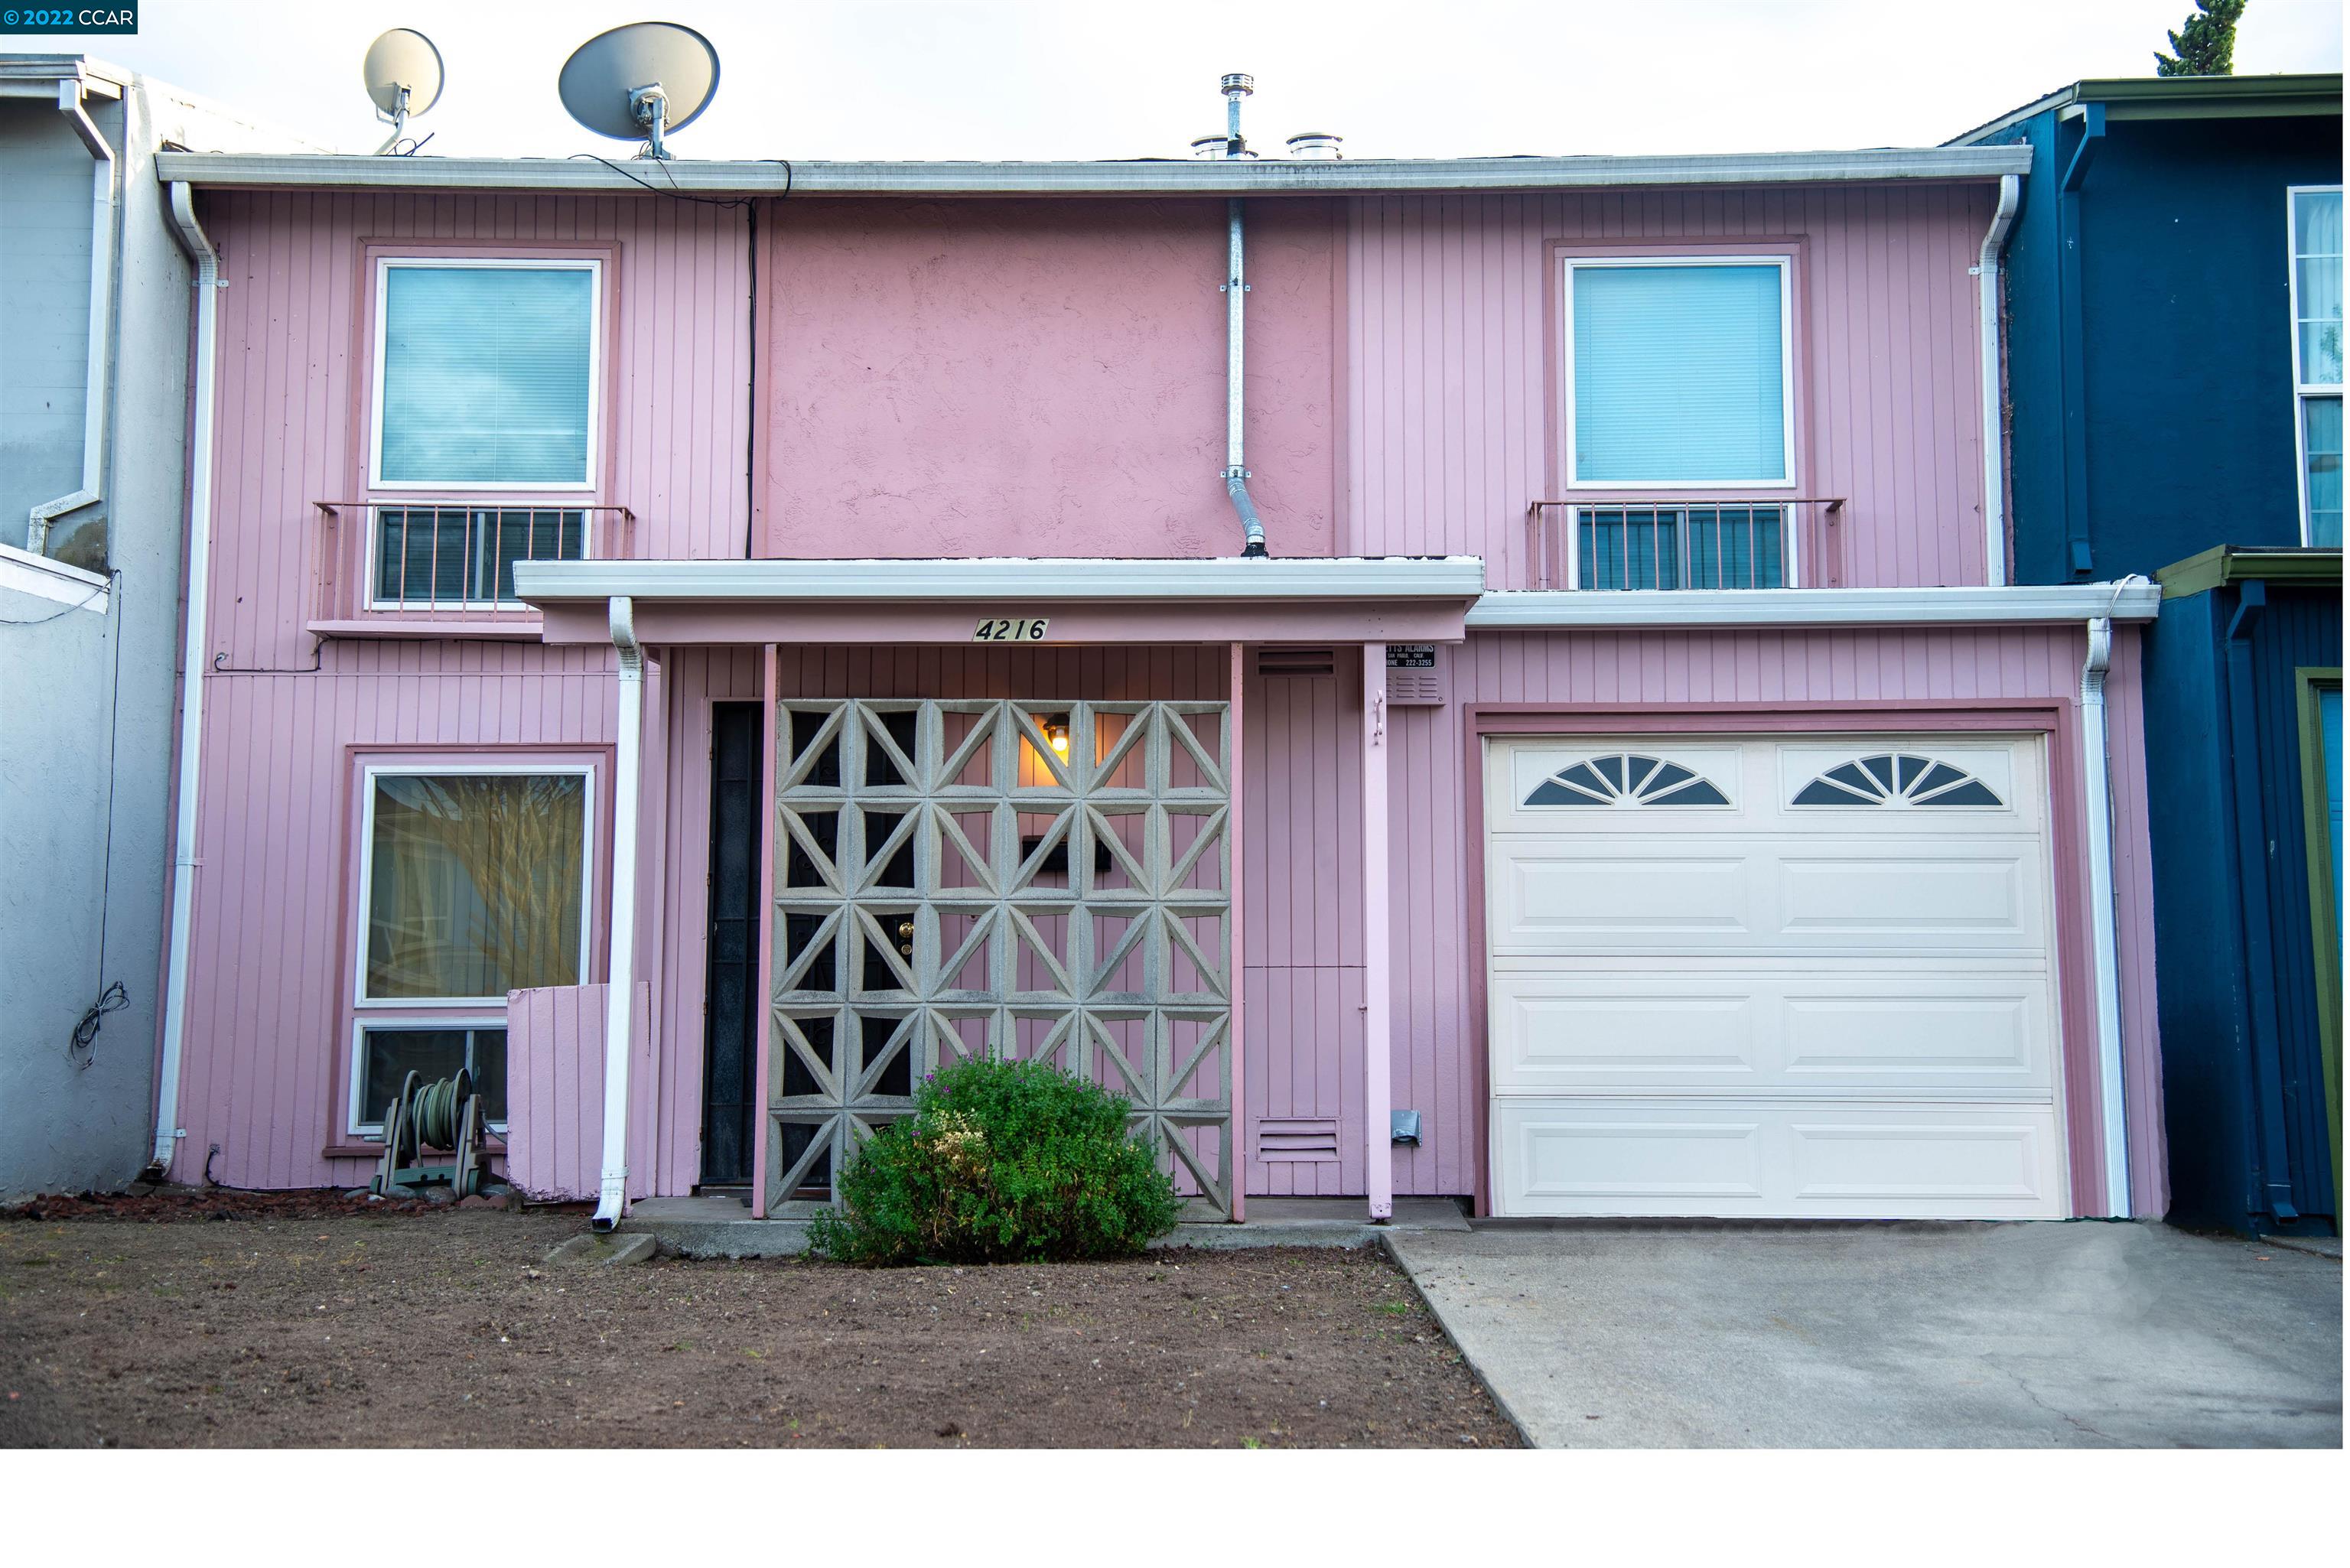 Photo of 4216 Overend Ave in Richmond, CA